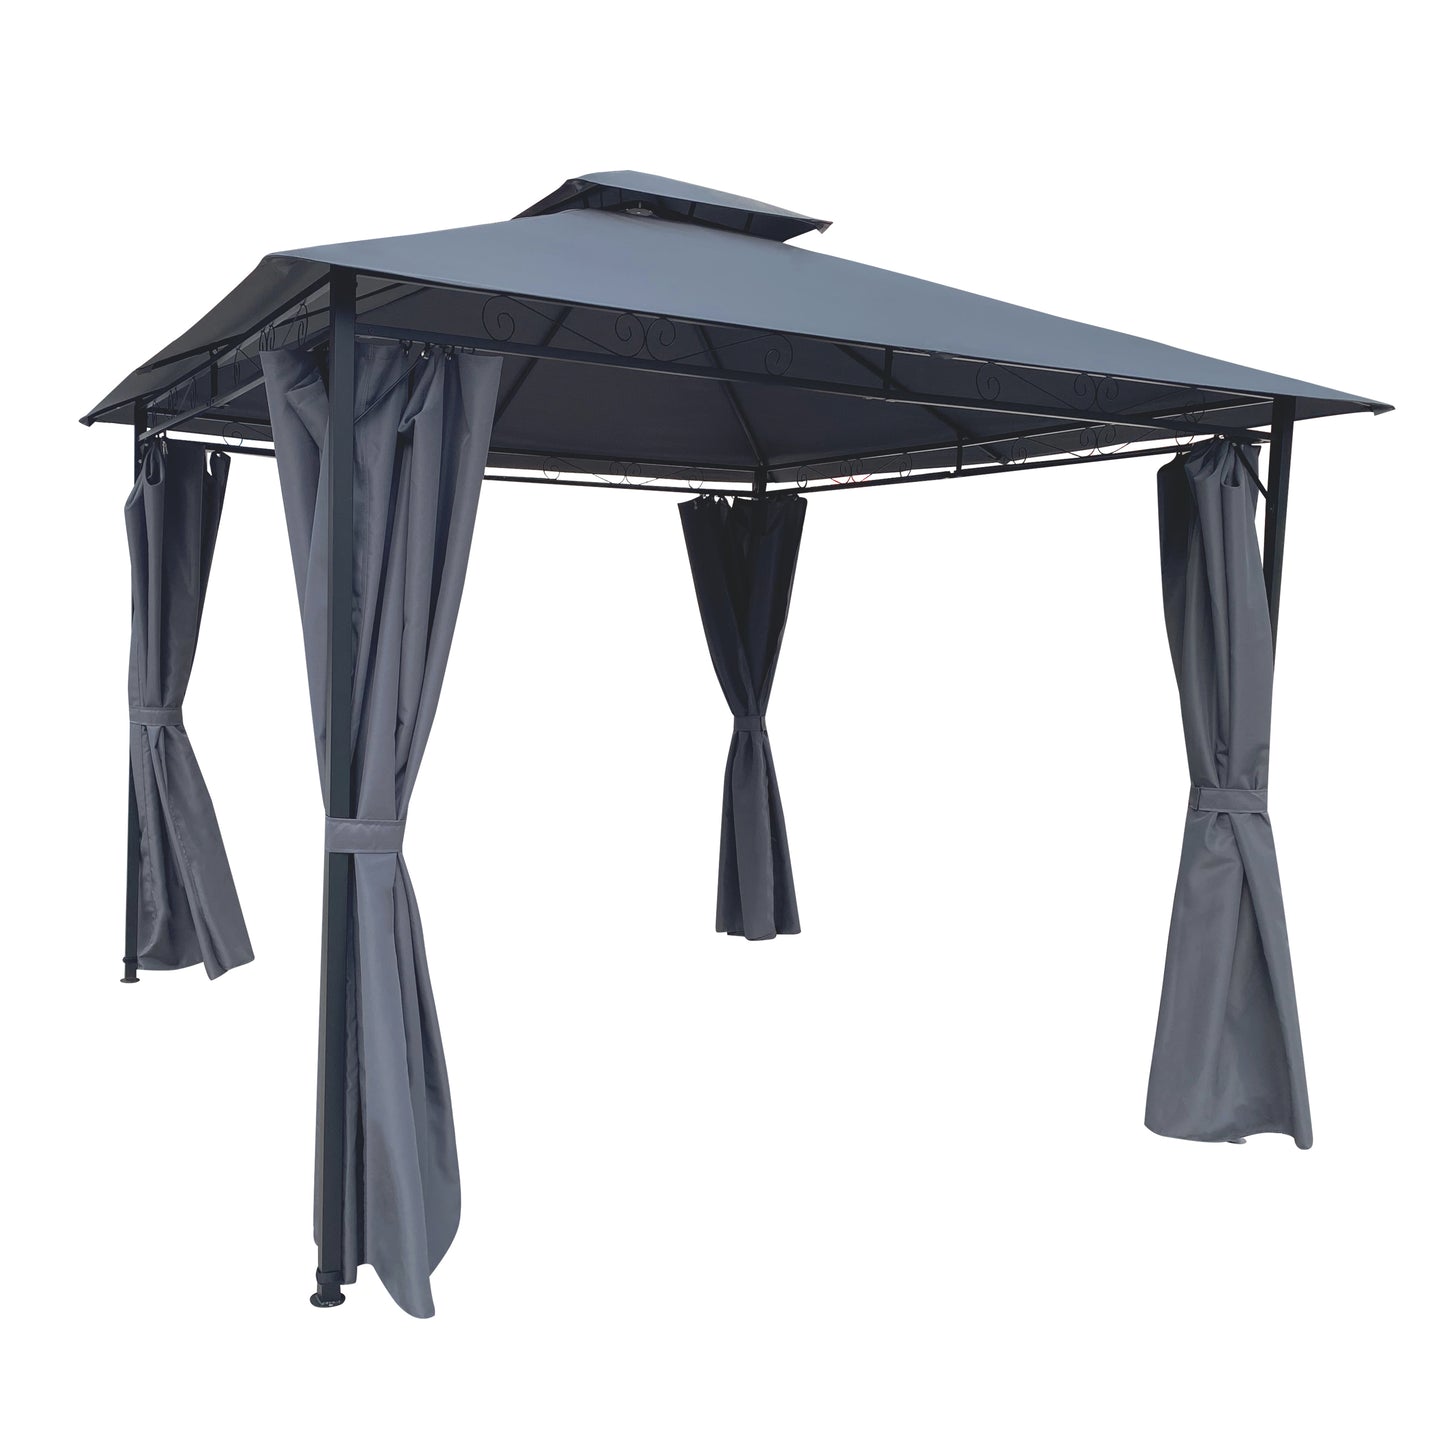 10x10Ft Gray Canopy Outdoor Patio Garden Gazebo Tent With Curtains